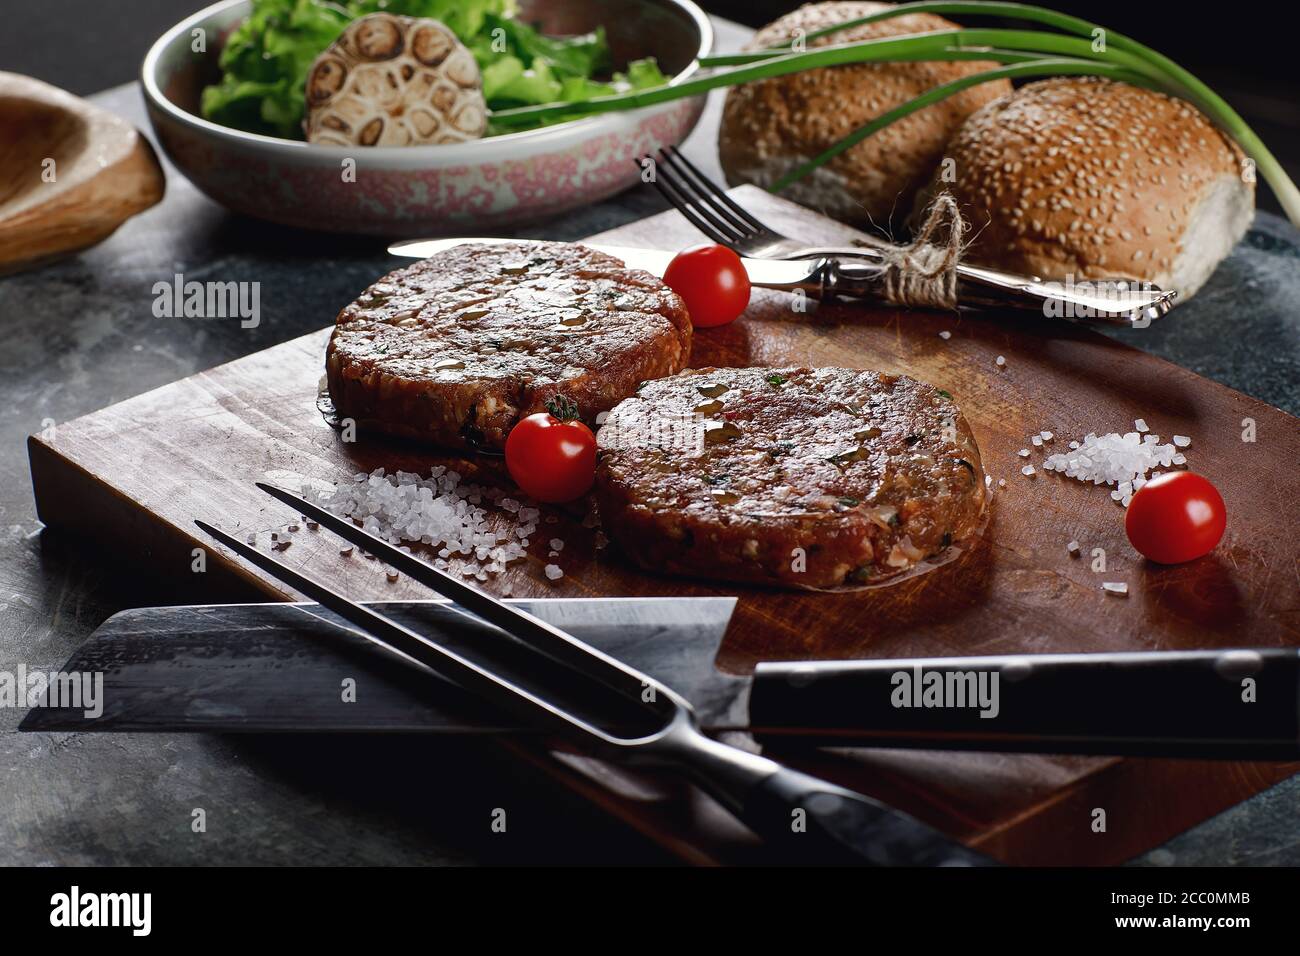 Raw Ground beef meat Burger steak cutlets with ingredients on the board. Stock Photo